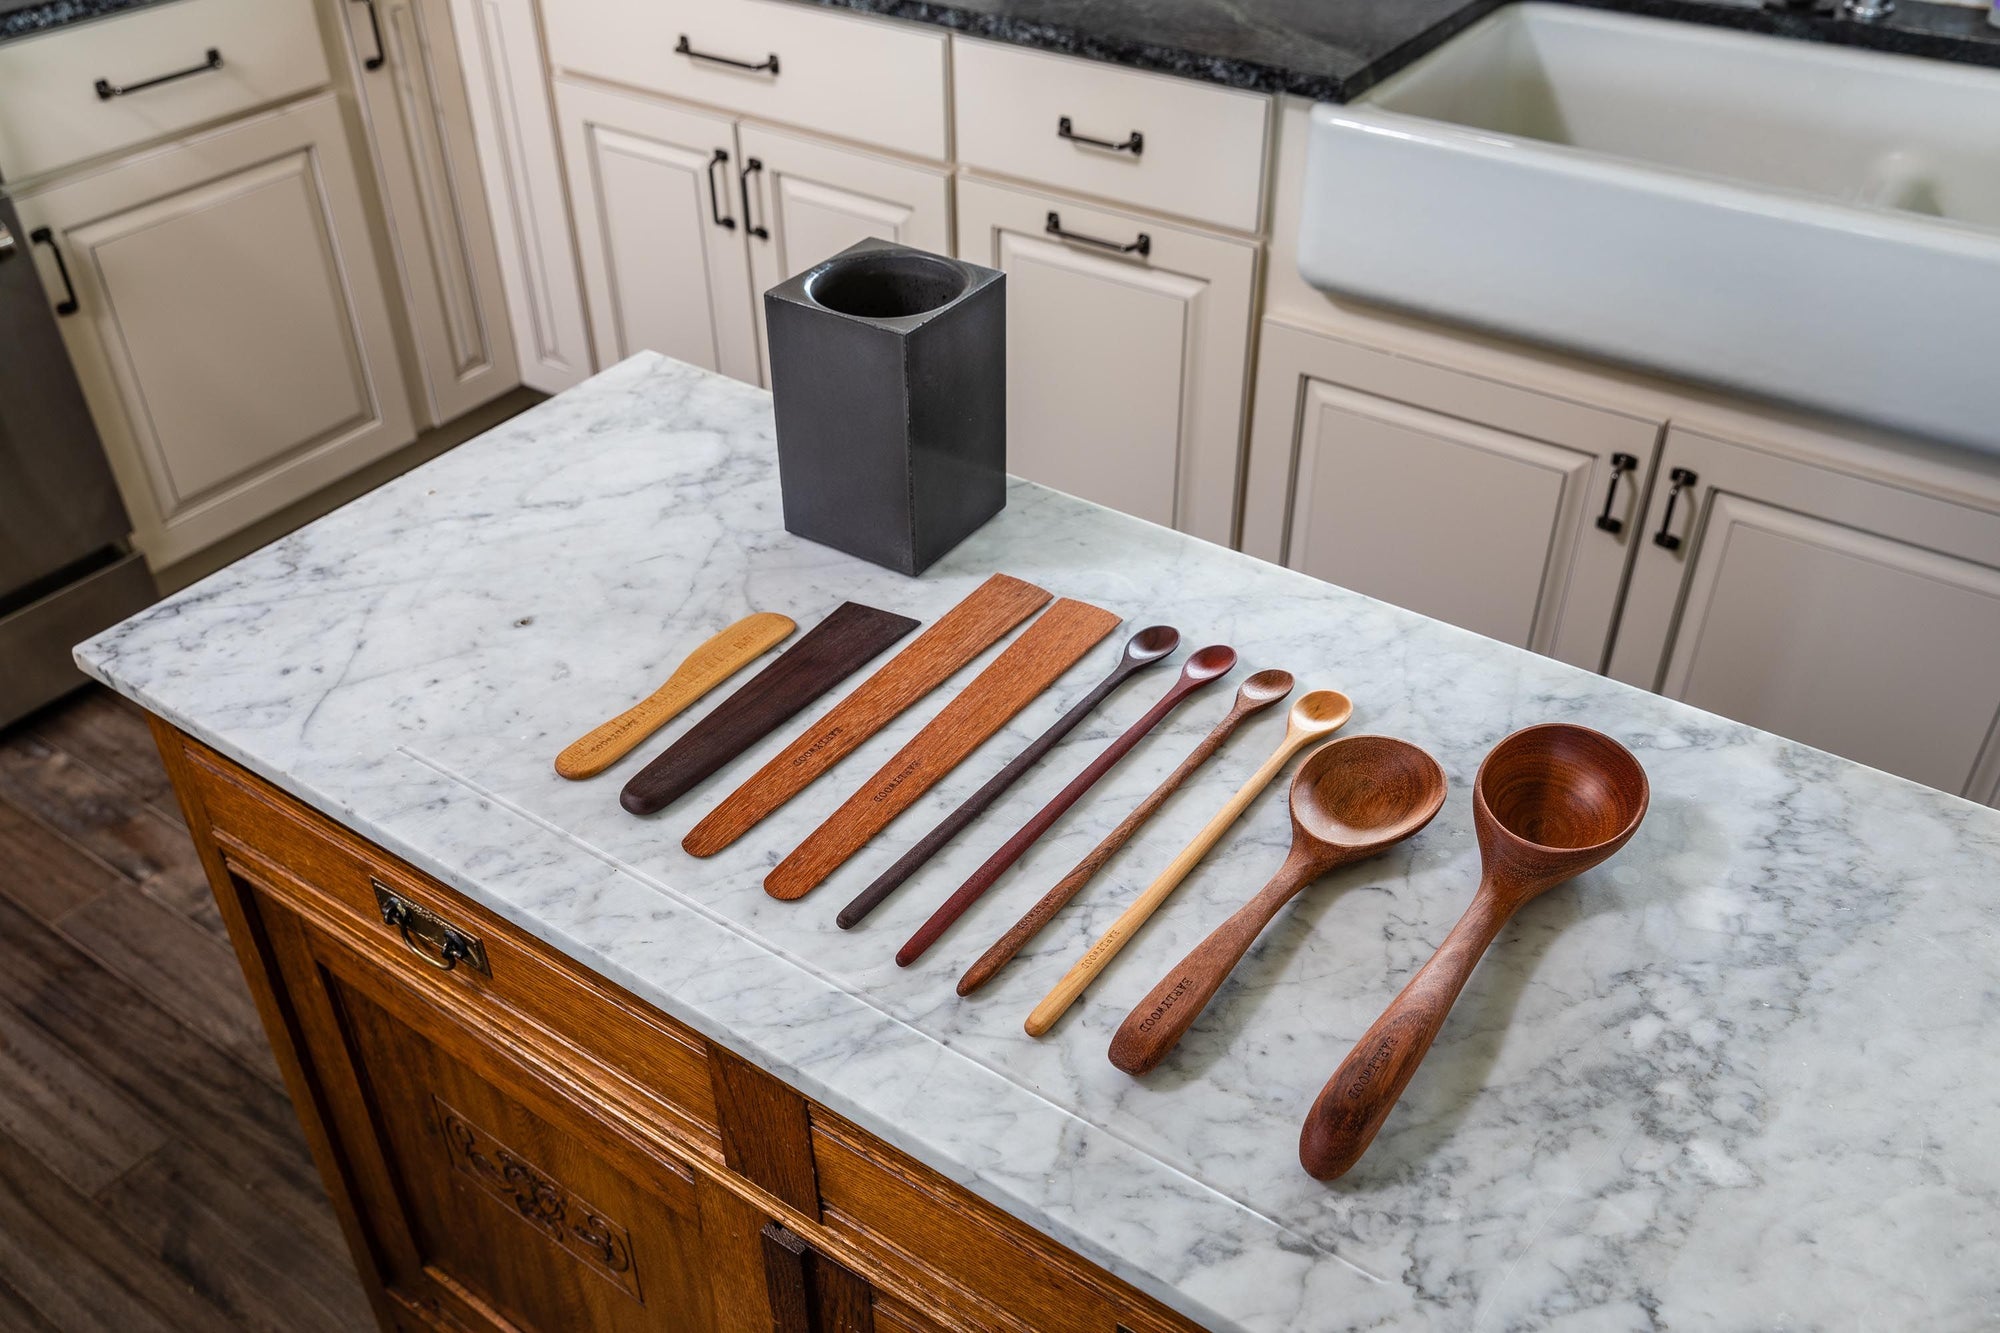 Wooden utensils laying on kitchen counter